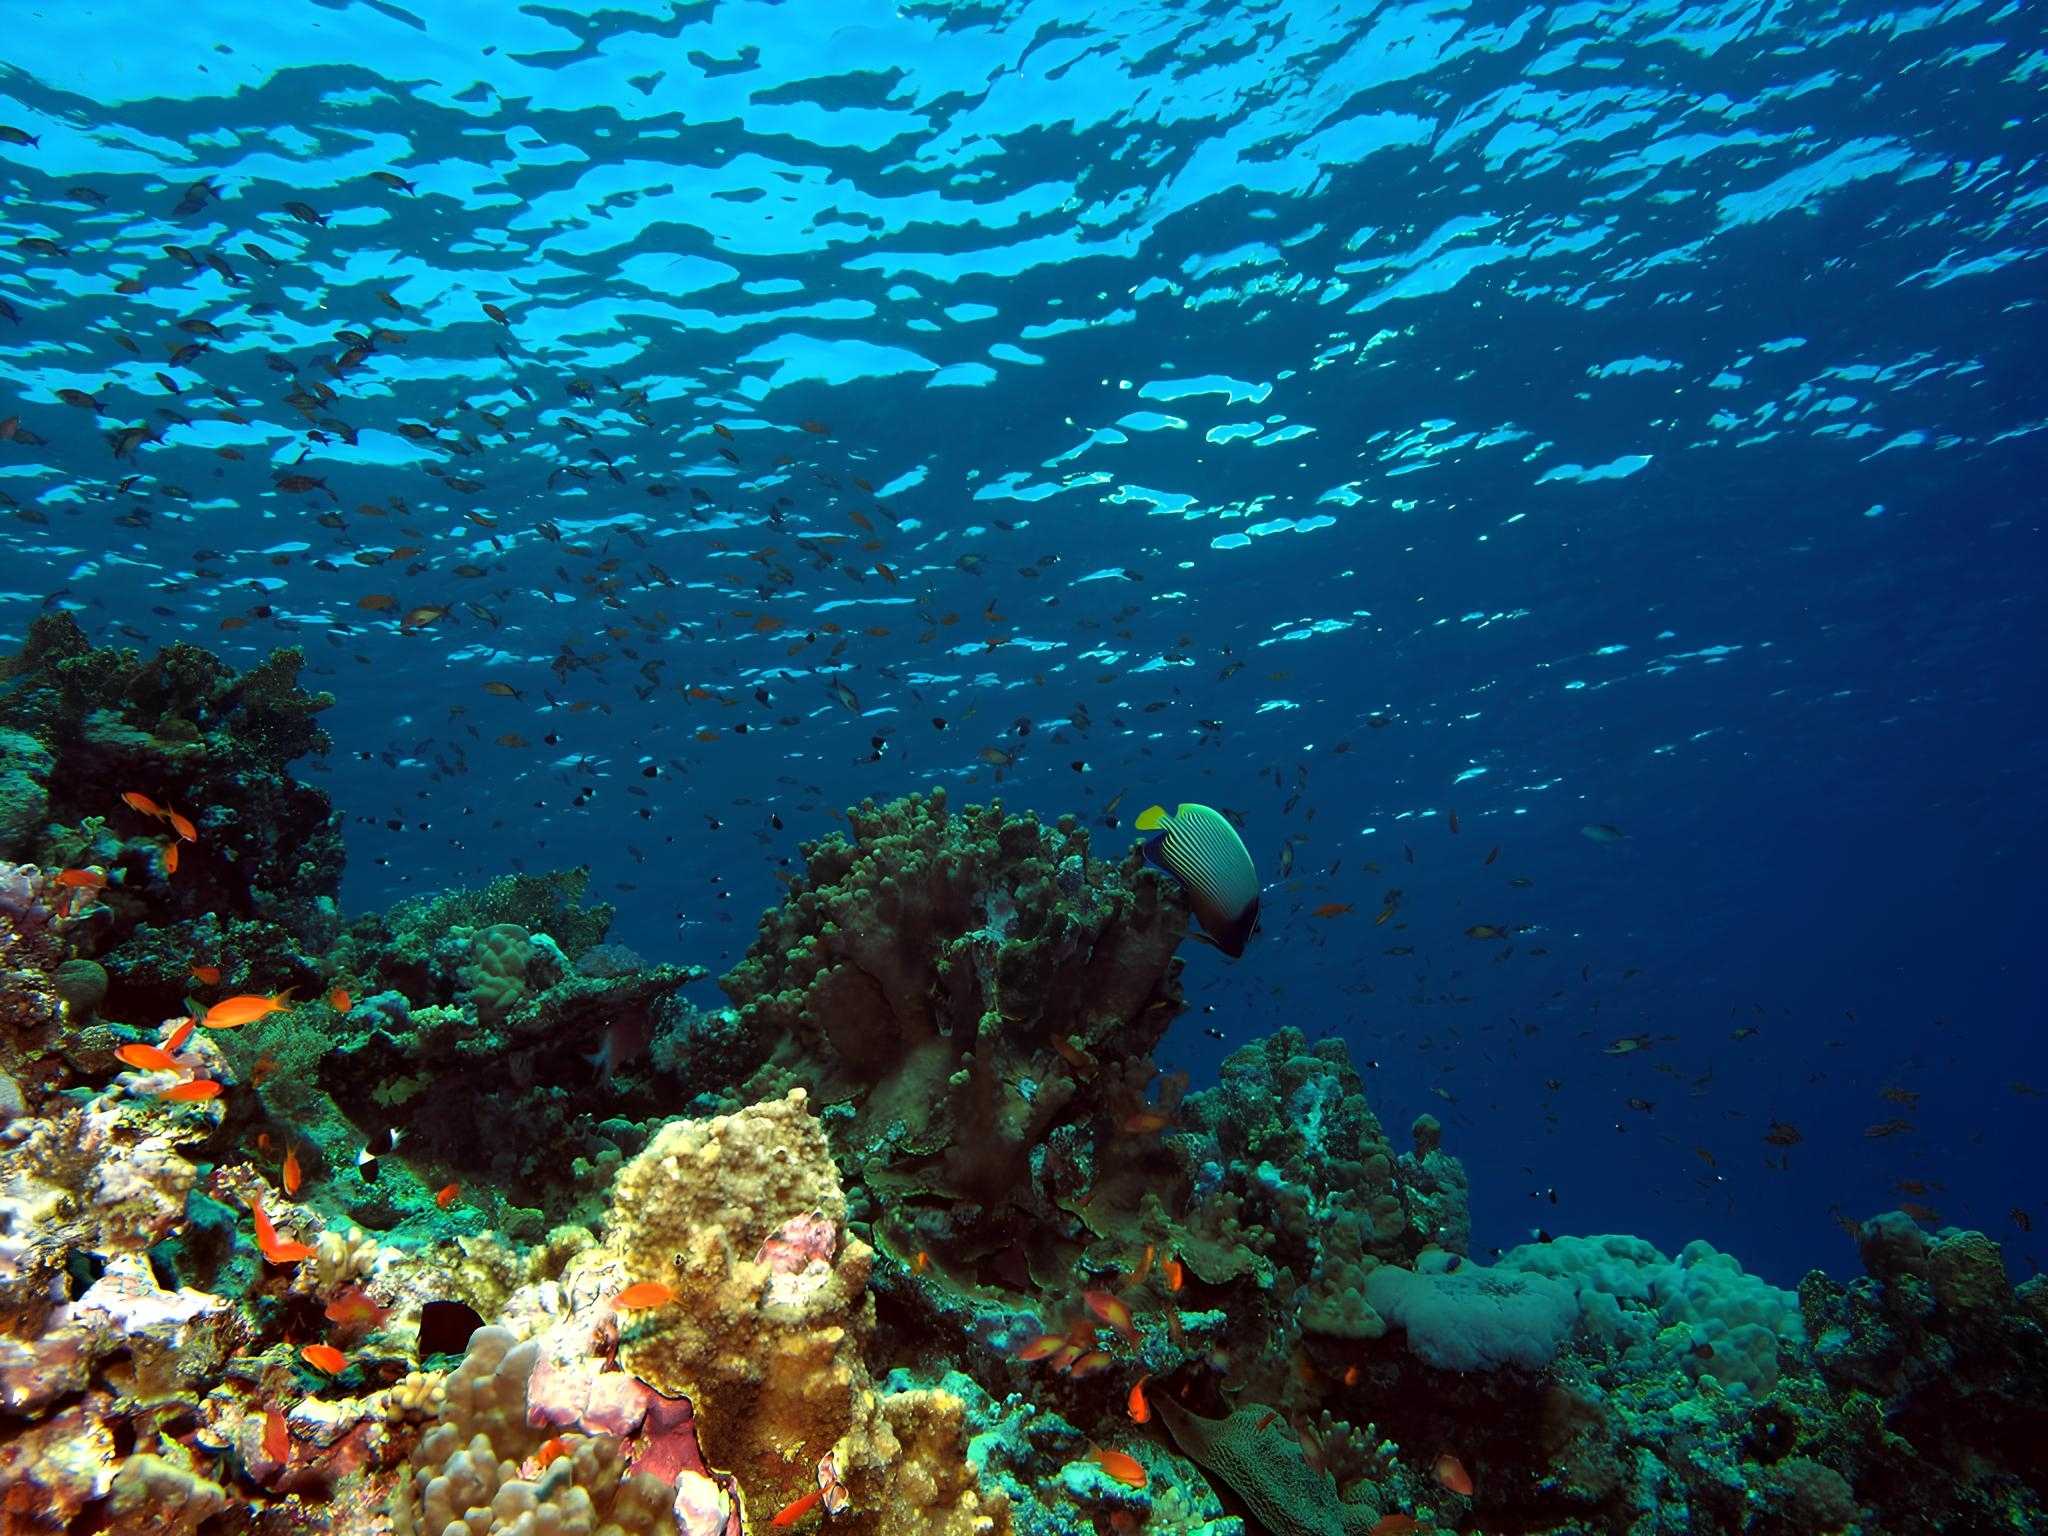 Corrals at Elphinstone Reef, Red Sea, Egypt